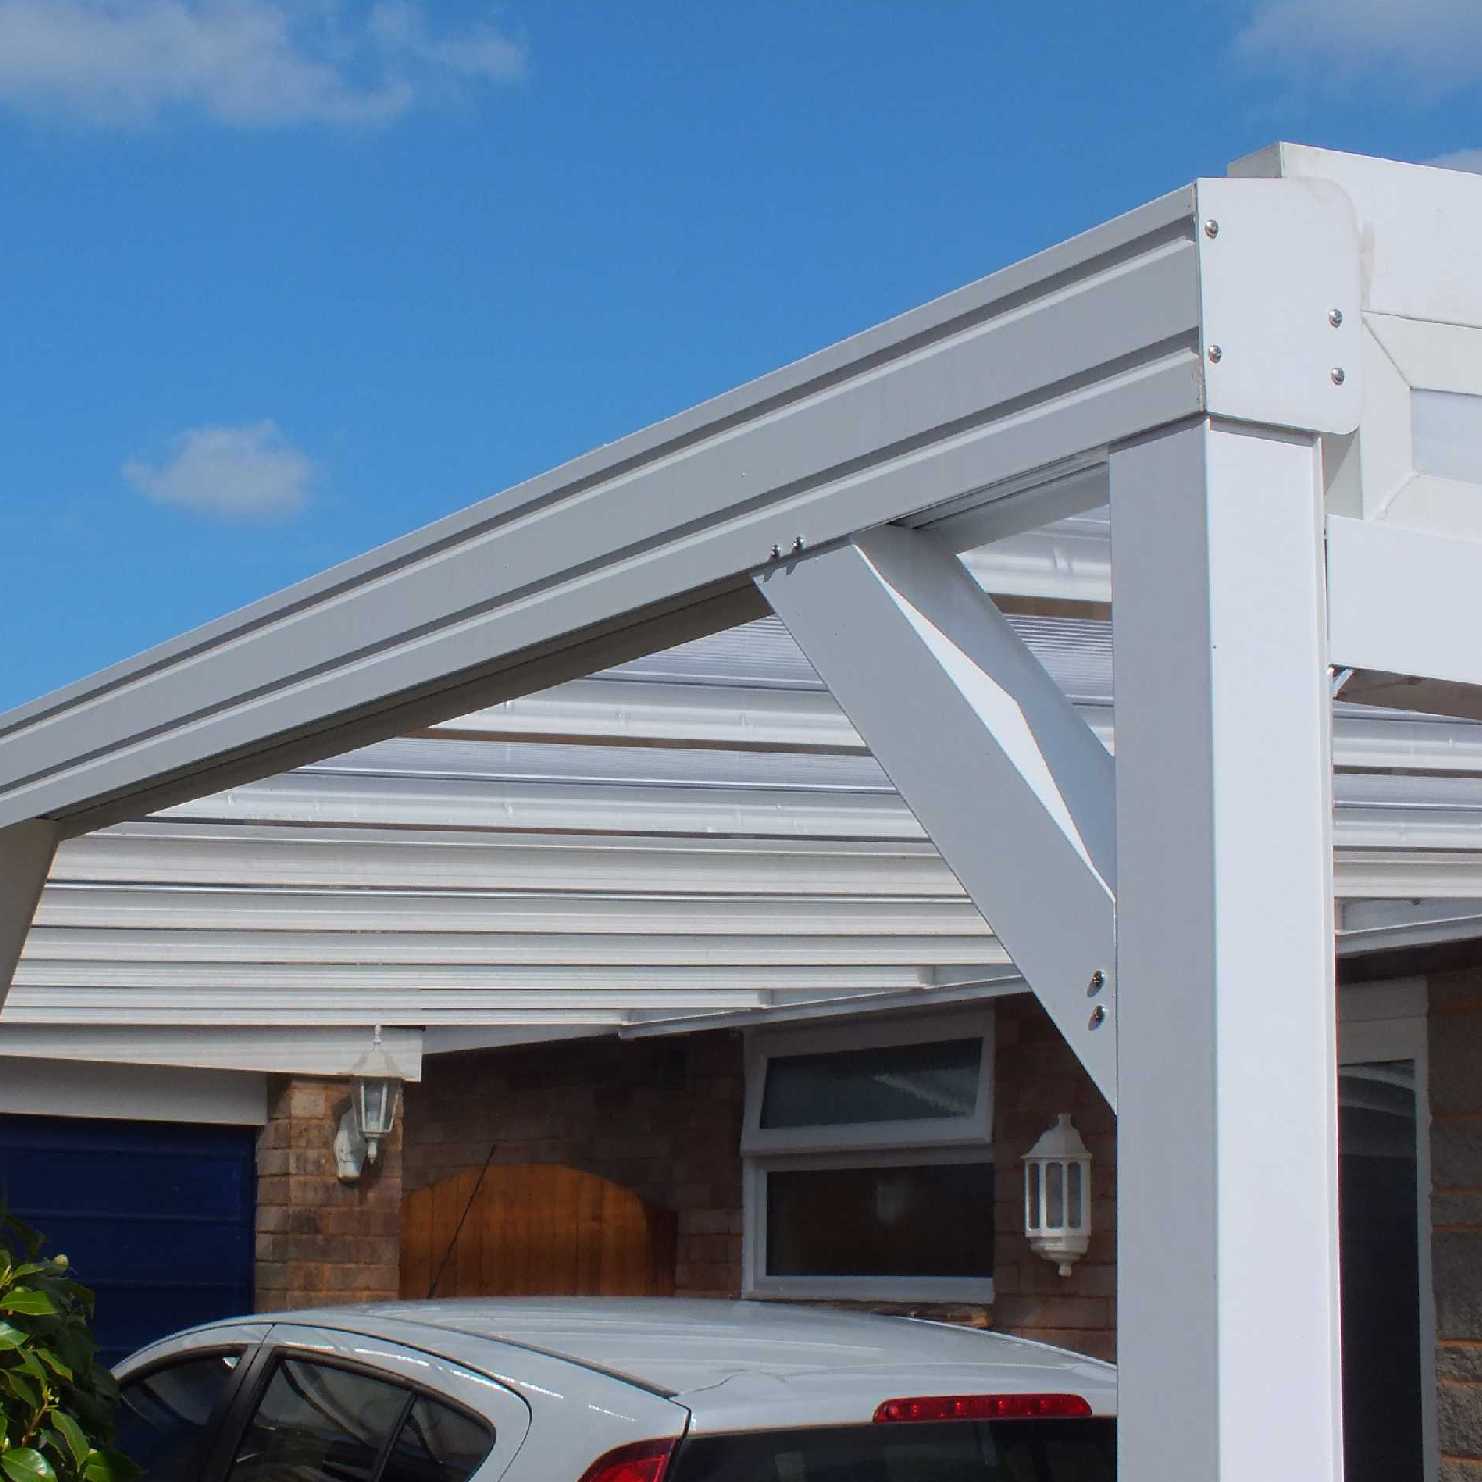 Great deals on Omega Smart Lean-To Canopy, White with 16mm Polycarbonate Glazing - 7.4m (W) x 2.5m (P), (4) Supporting Posts